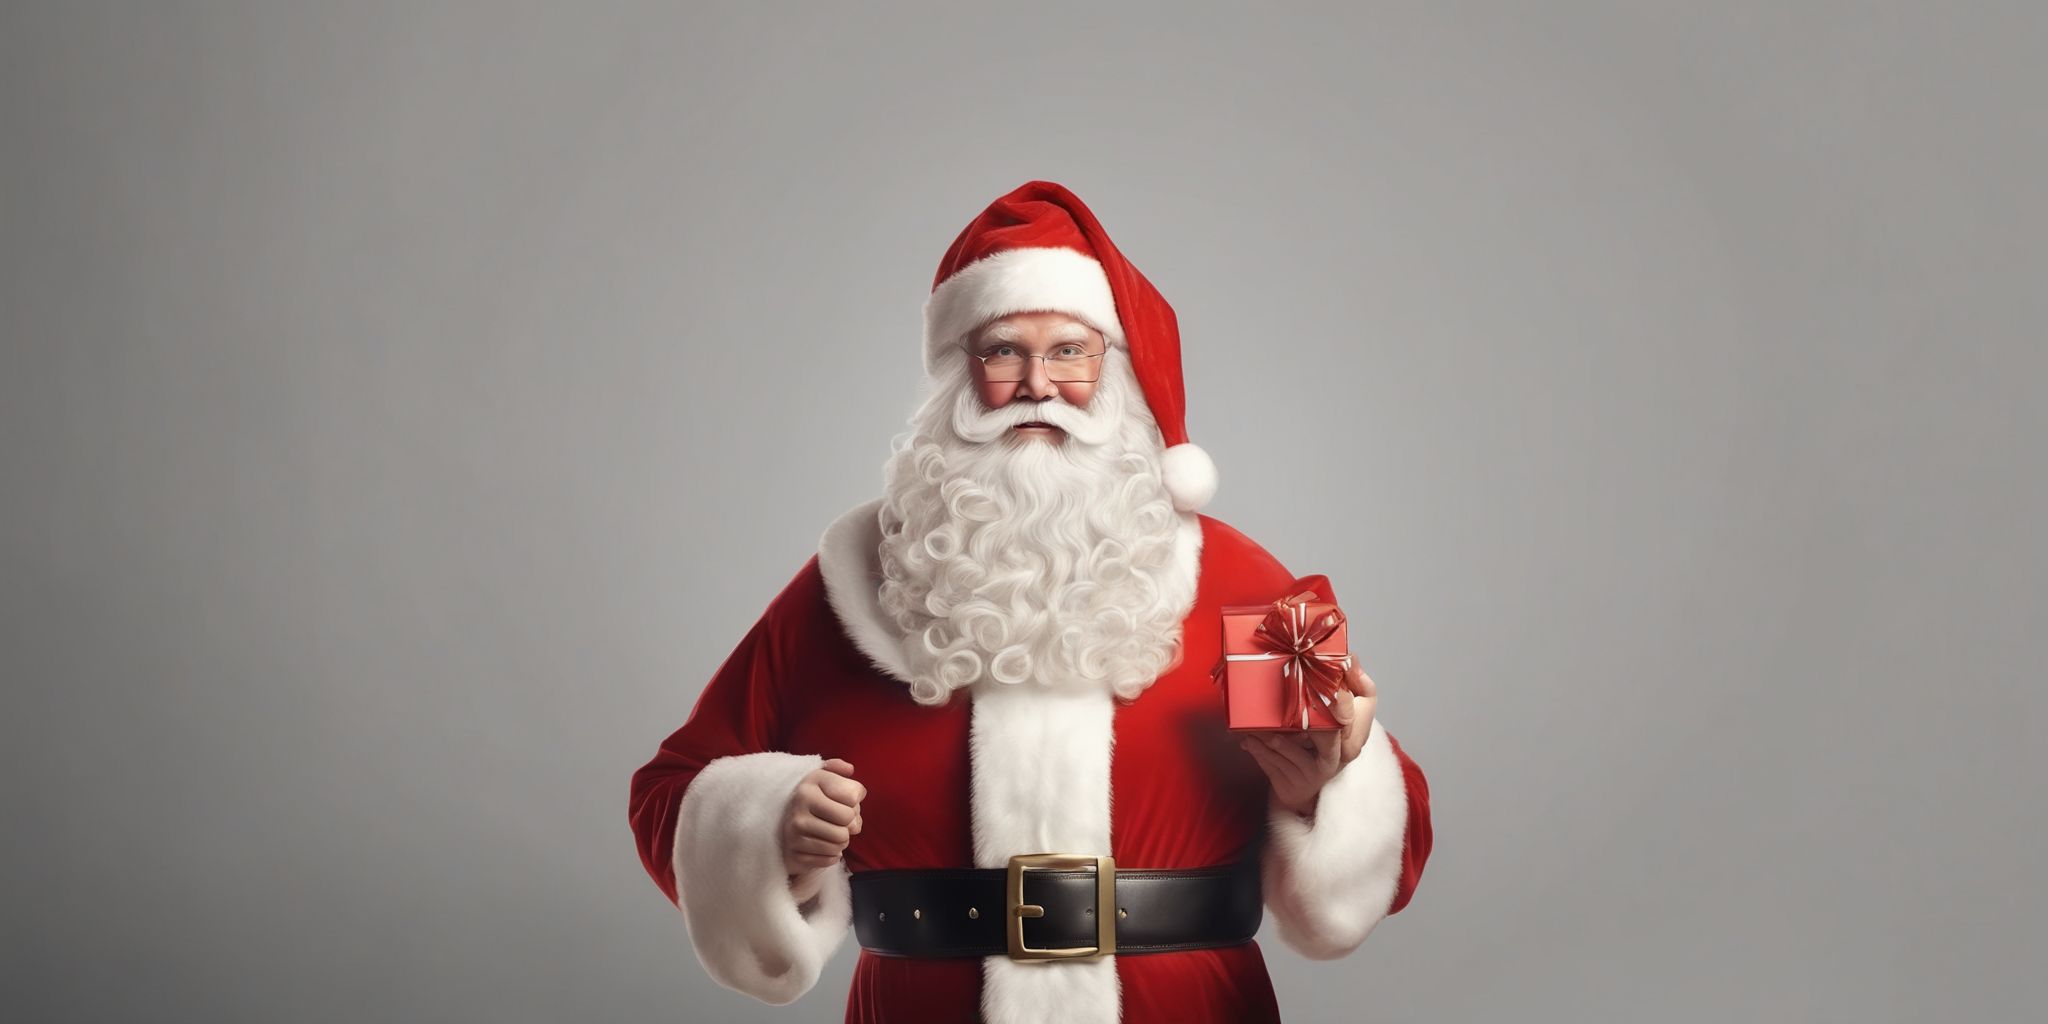 Santa in realistic Christmas style